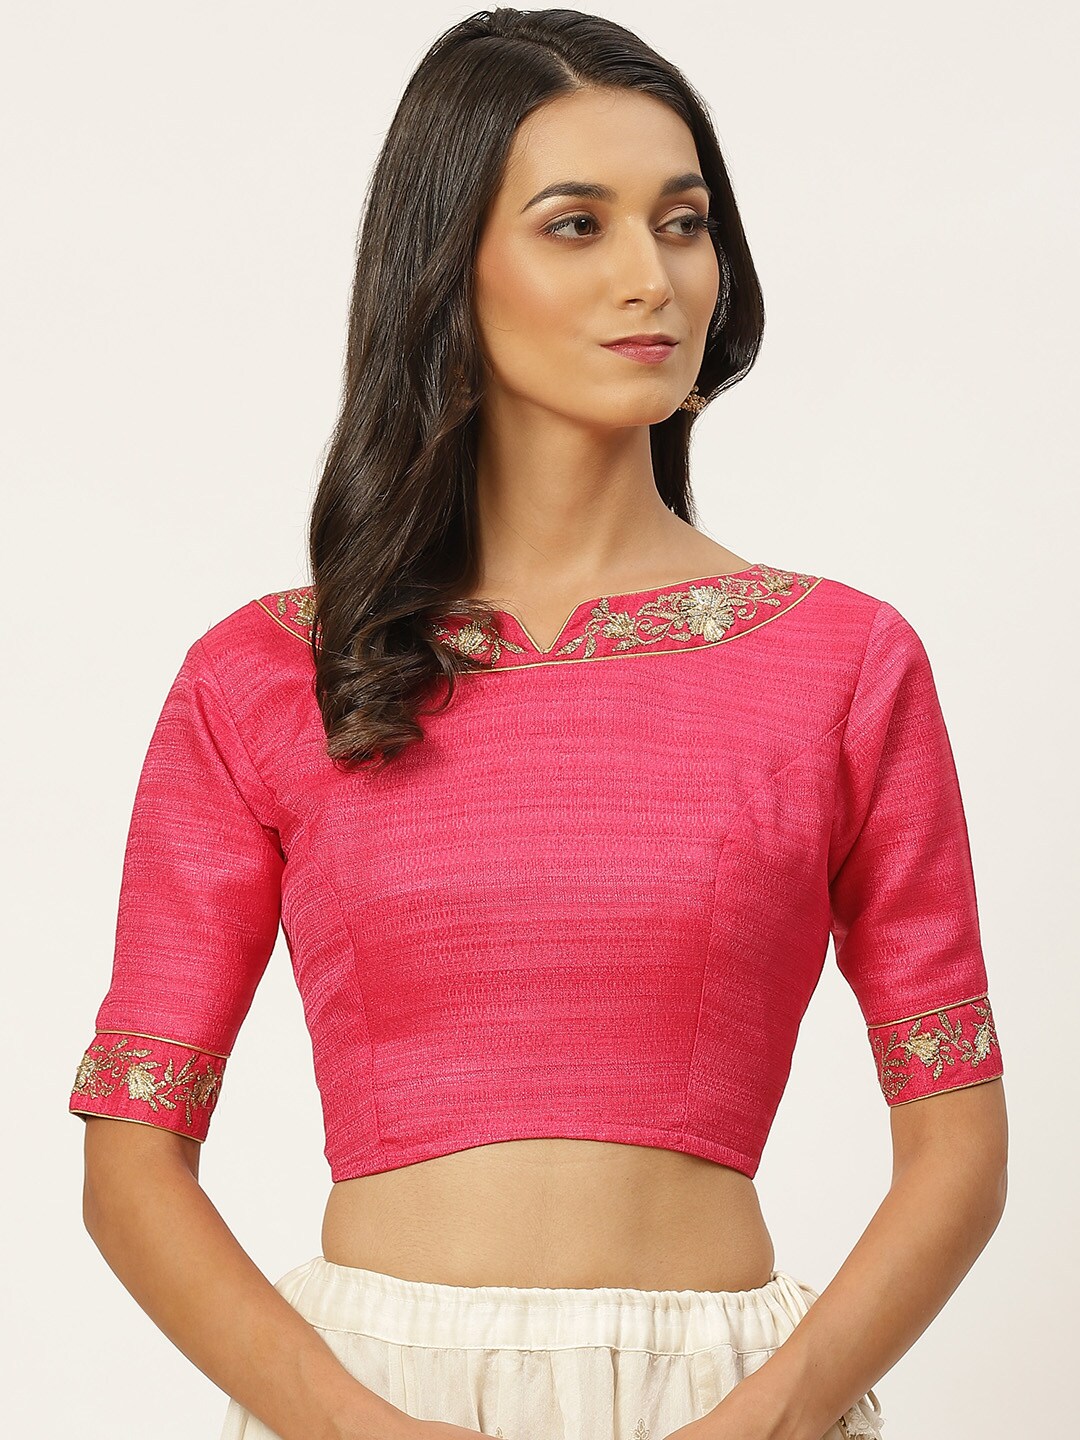 Studio Shringaar Women Pink & Golden Solid Stitched Saree Blouse With Embroidered Detail Price in India